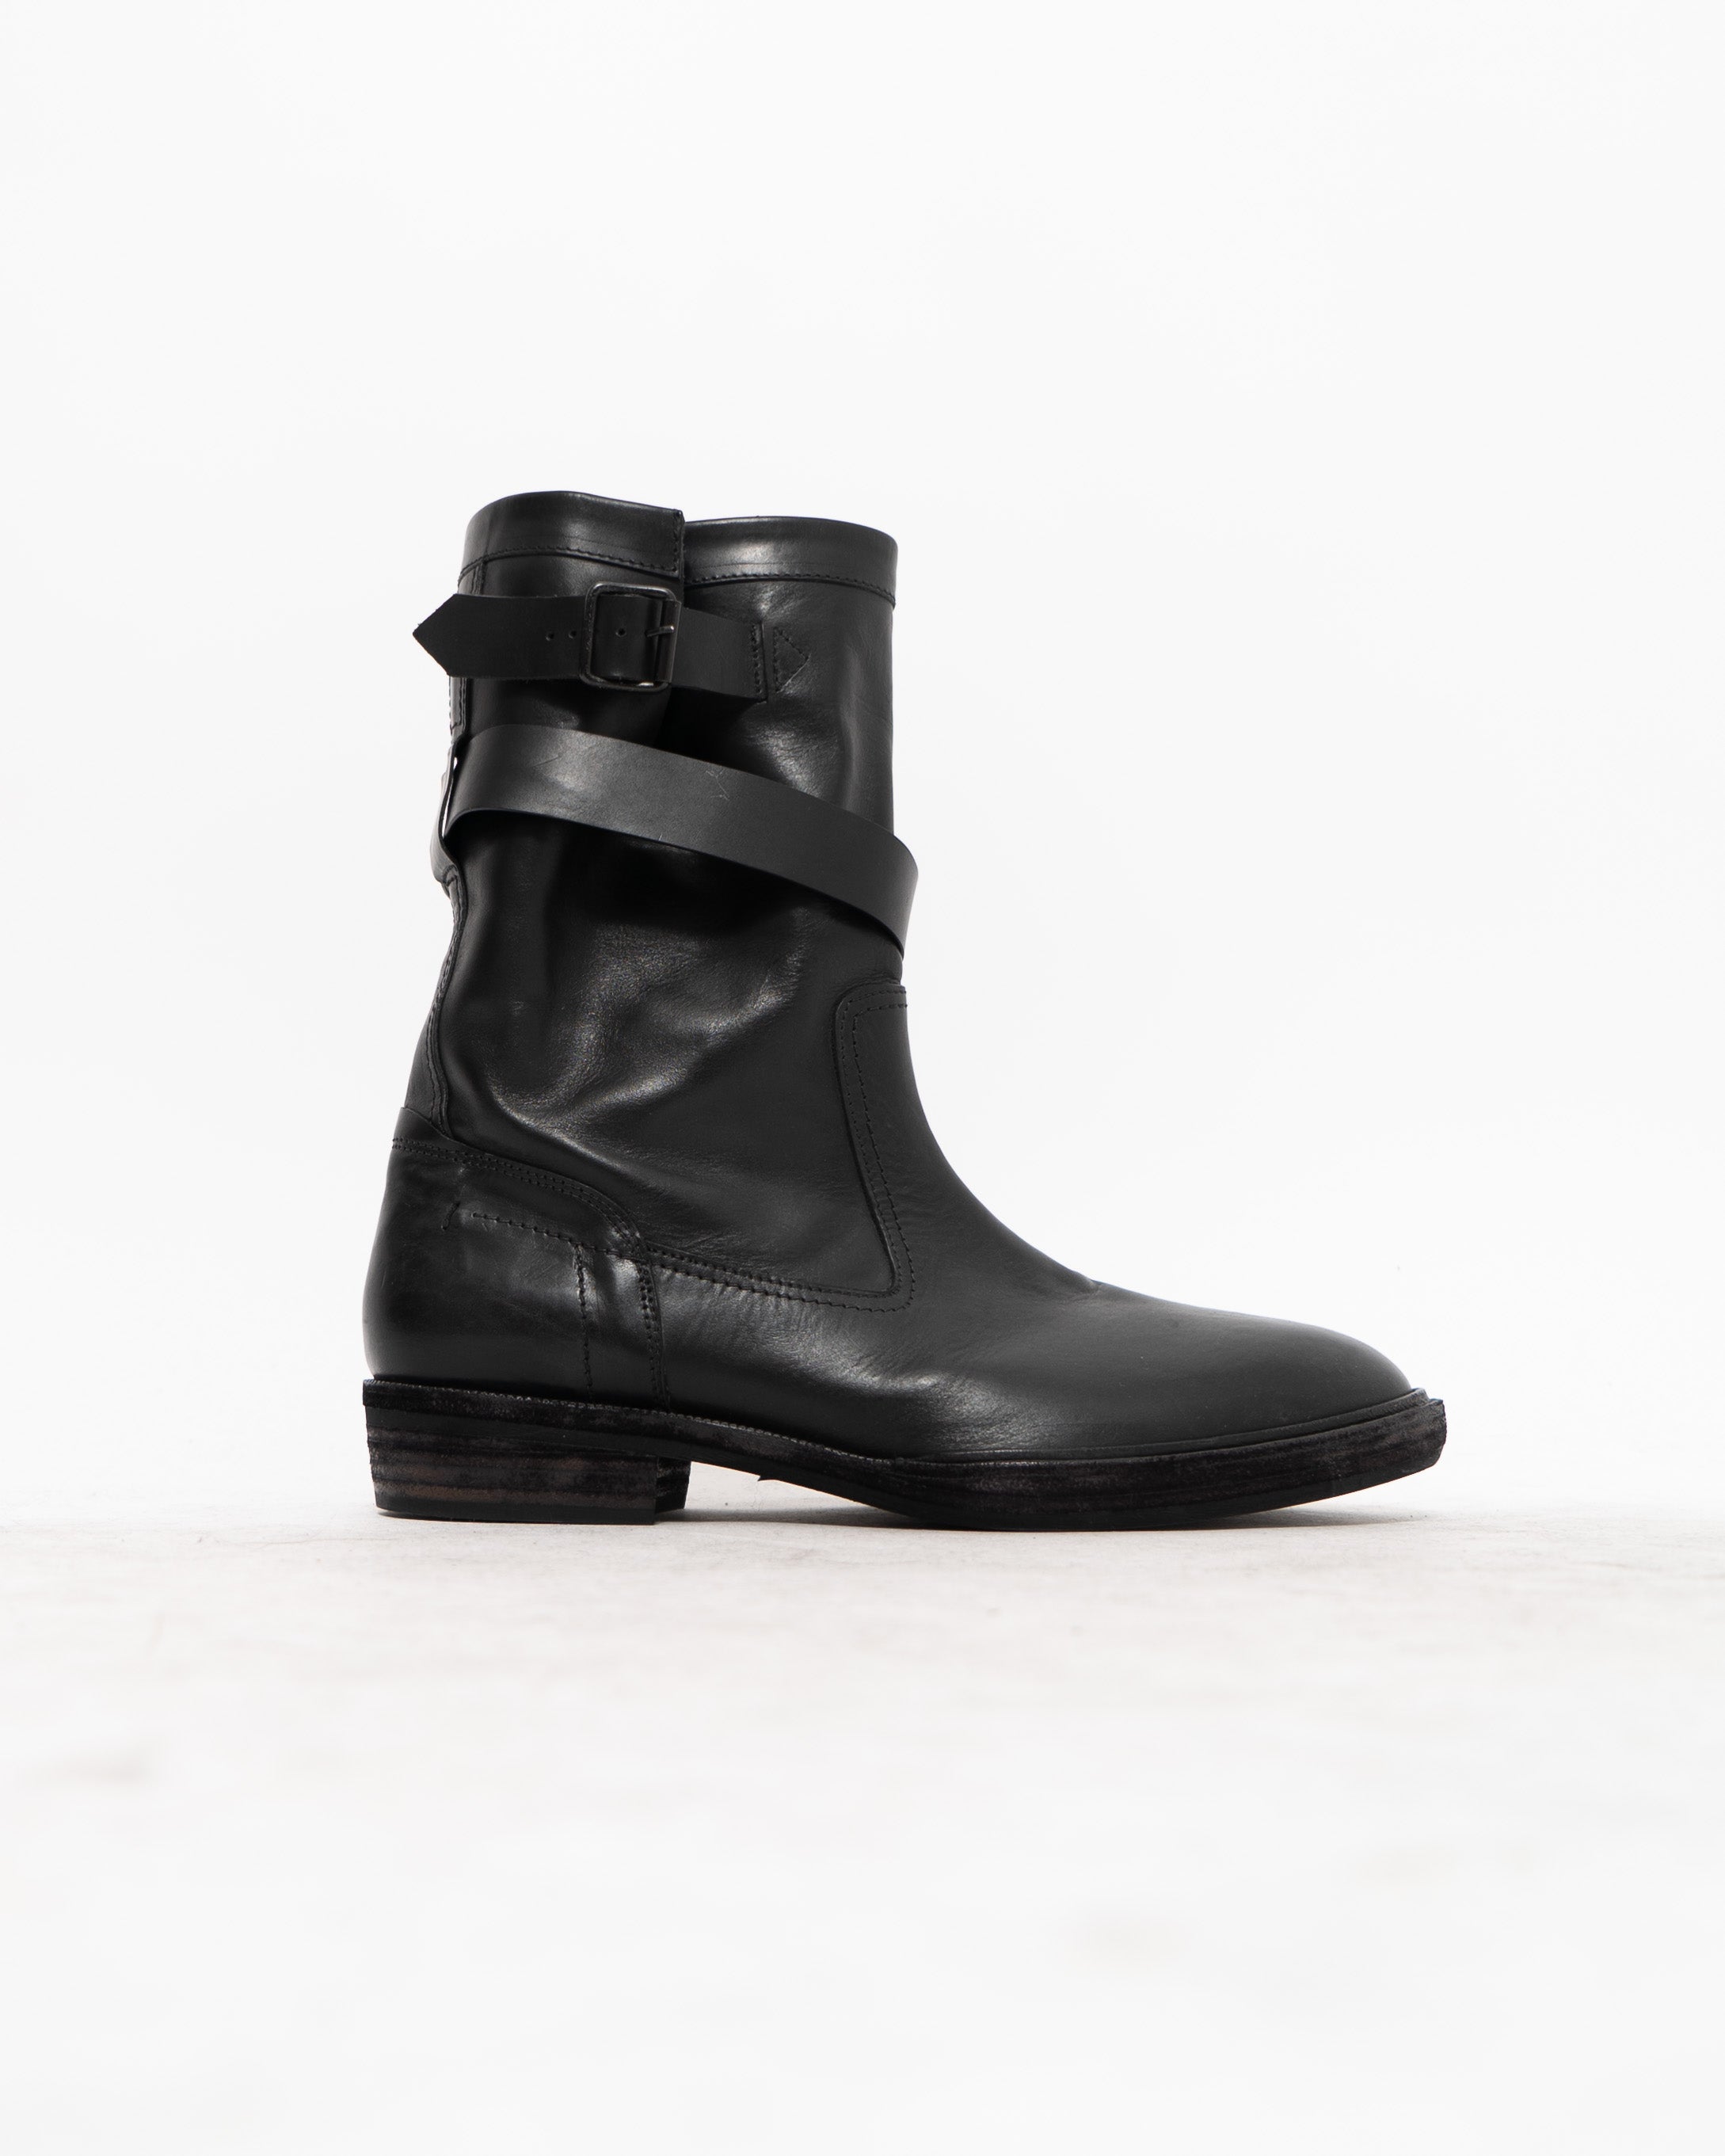 FW17 Black Dean Engineer Leather Boots